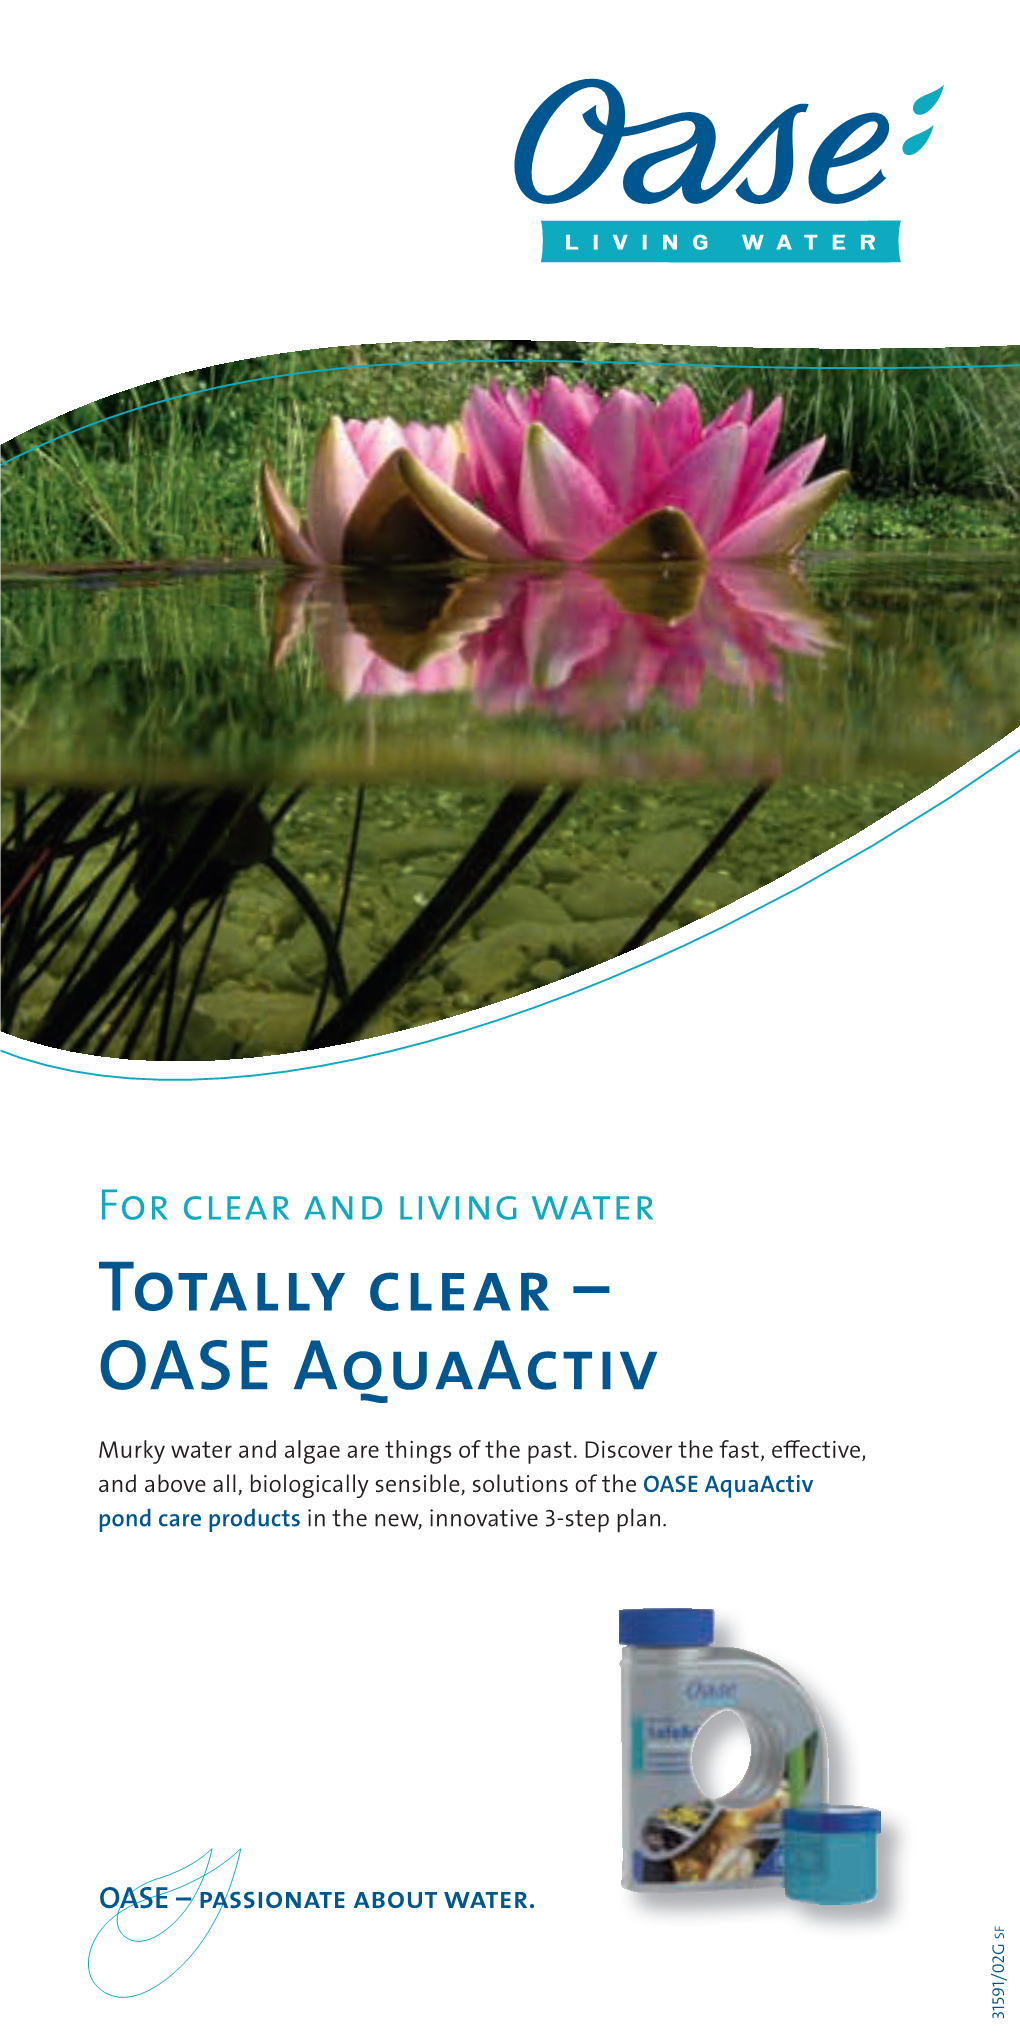 OASE Aquaactiv Totally Clear– for Clearandliving Water E Products Inthenew, Innovative 3-Step Plan